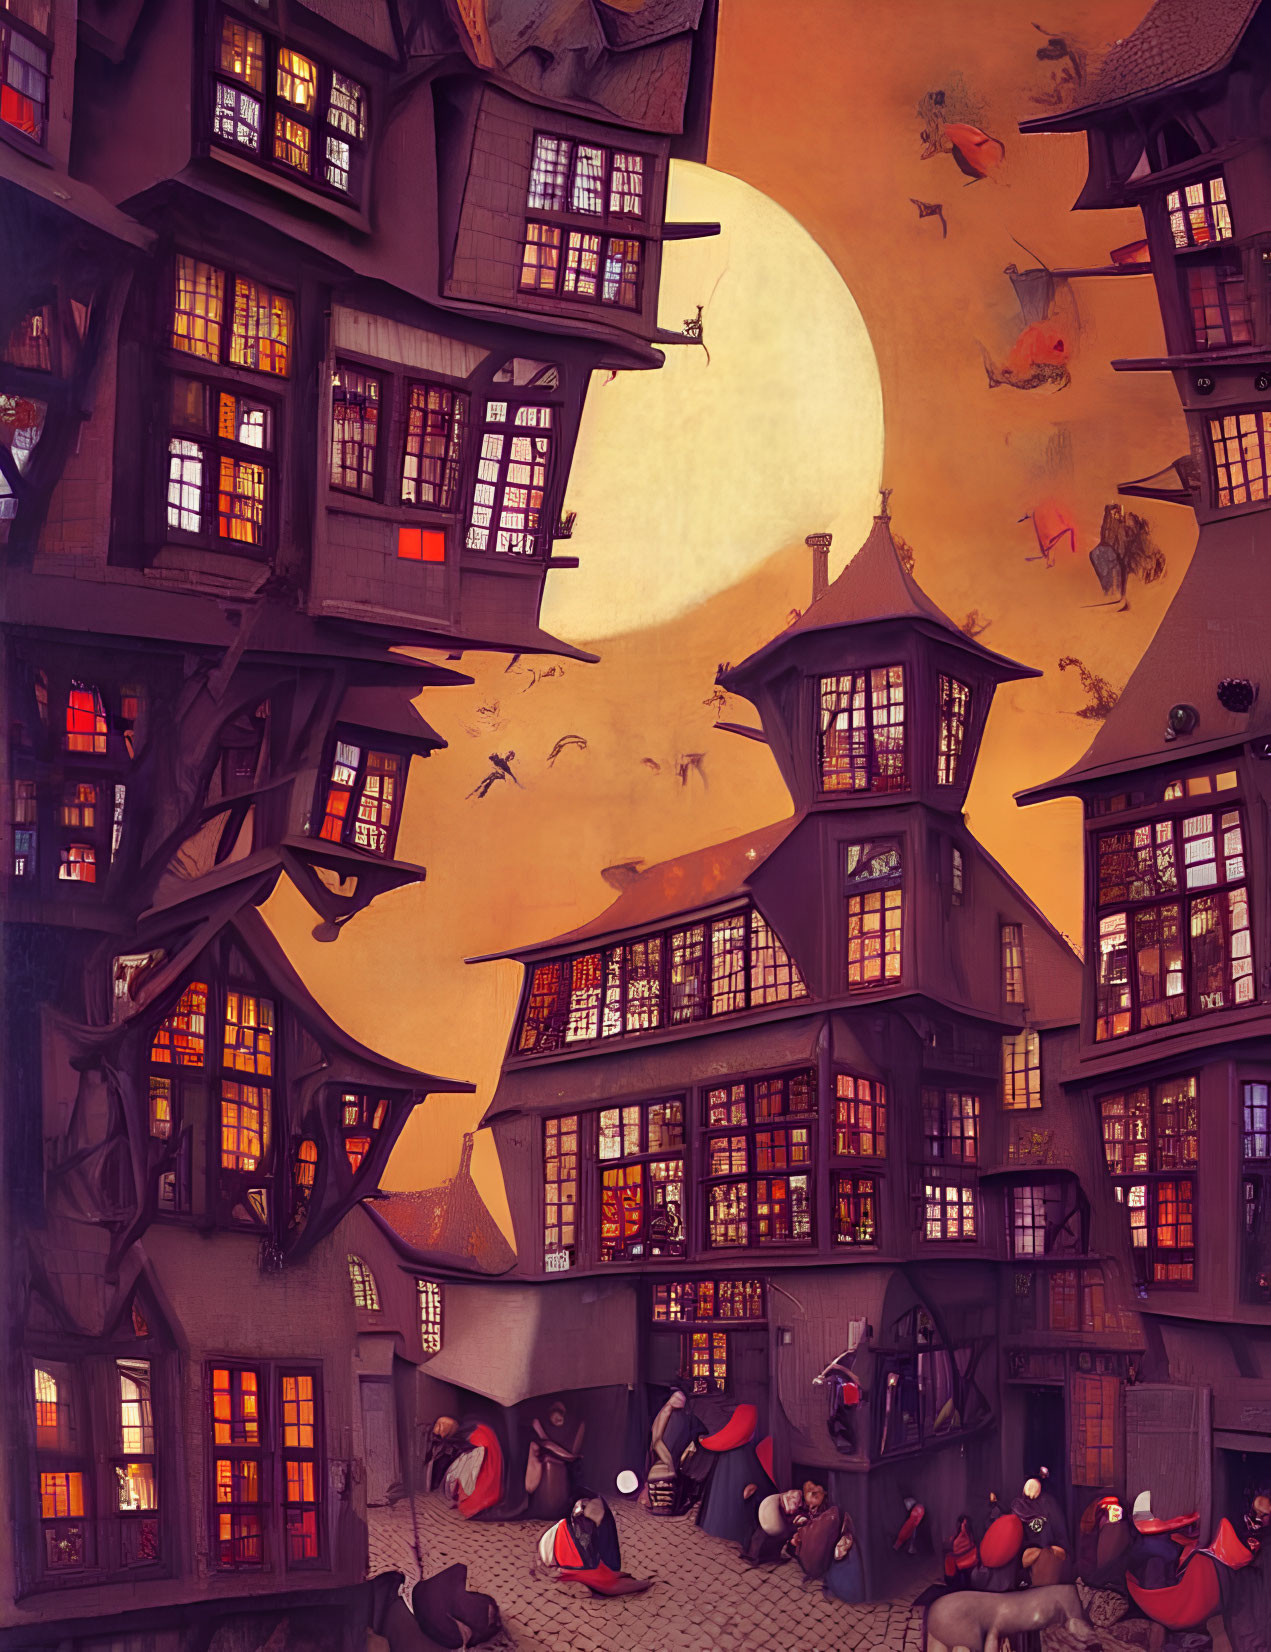 Medieval town scene with crooked buildings, large moon, and flying witches at twilight